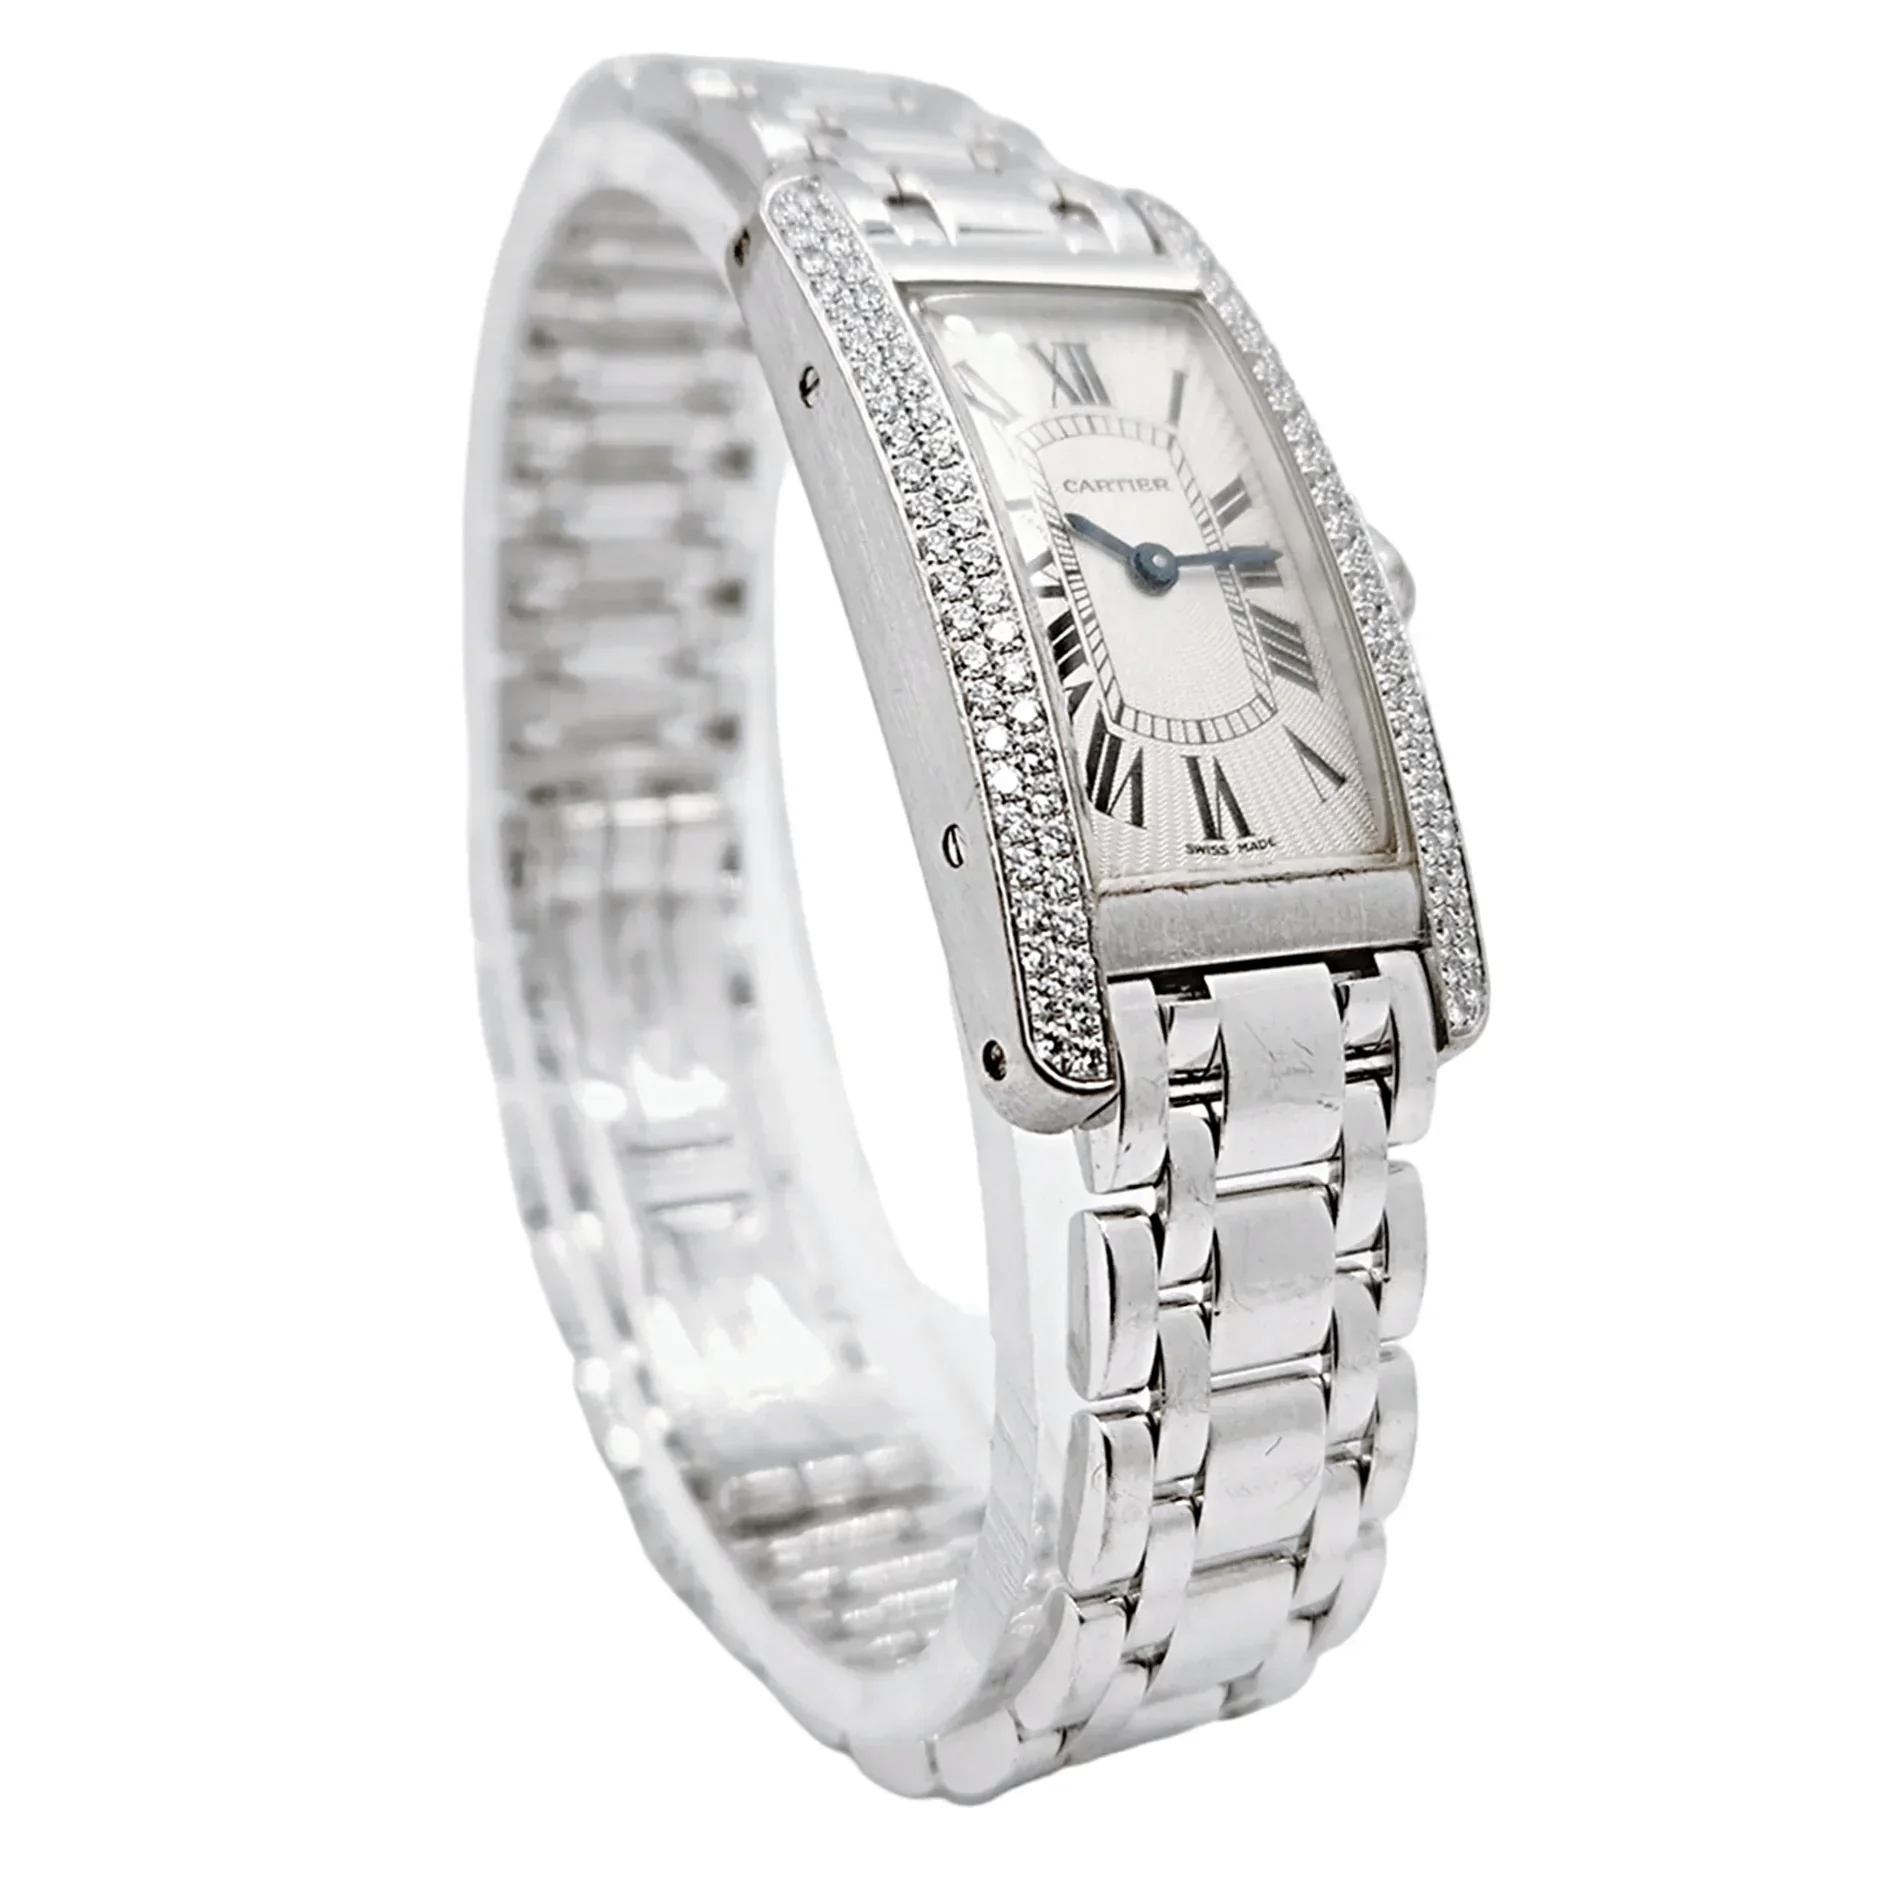 Ladies Cartier 23mm American Tank 18K White Gold Watch with Roman Numeral and Diamond Bezel. (Pre-Owned WB7018L1)